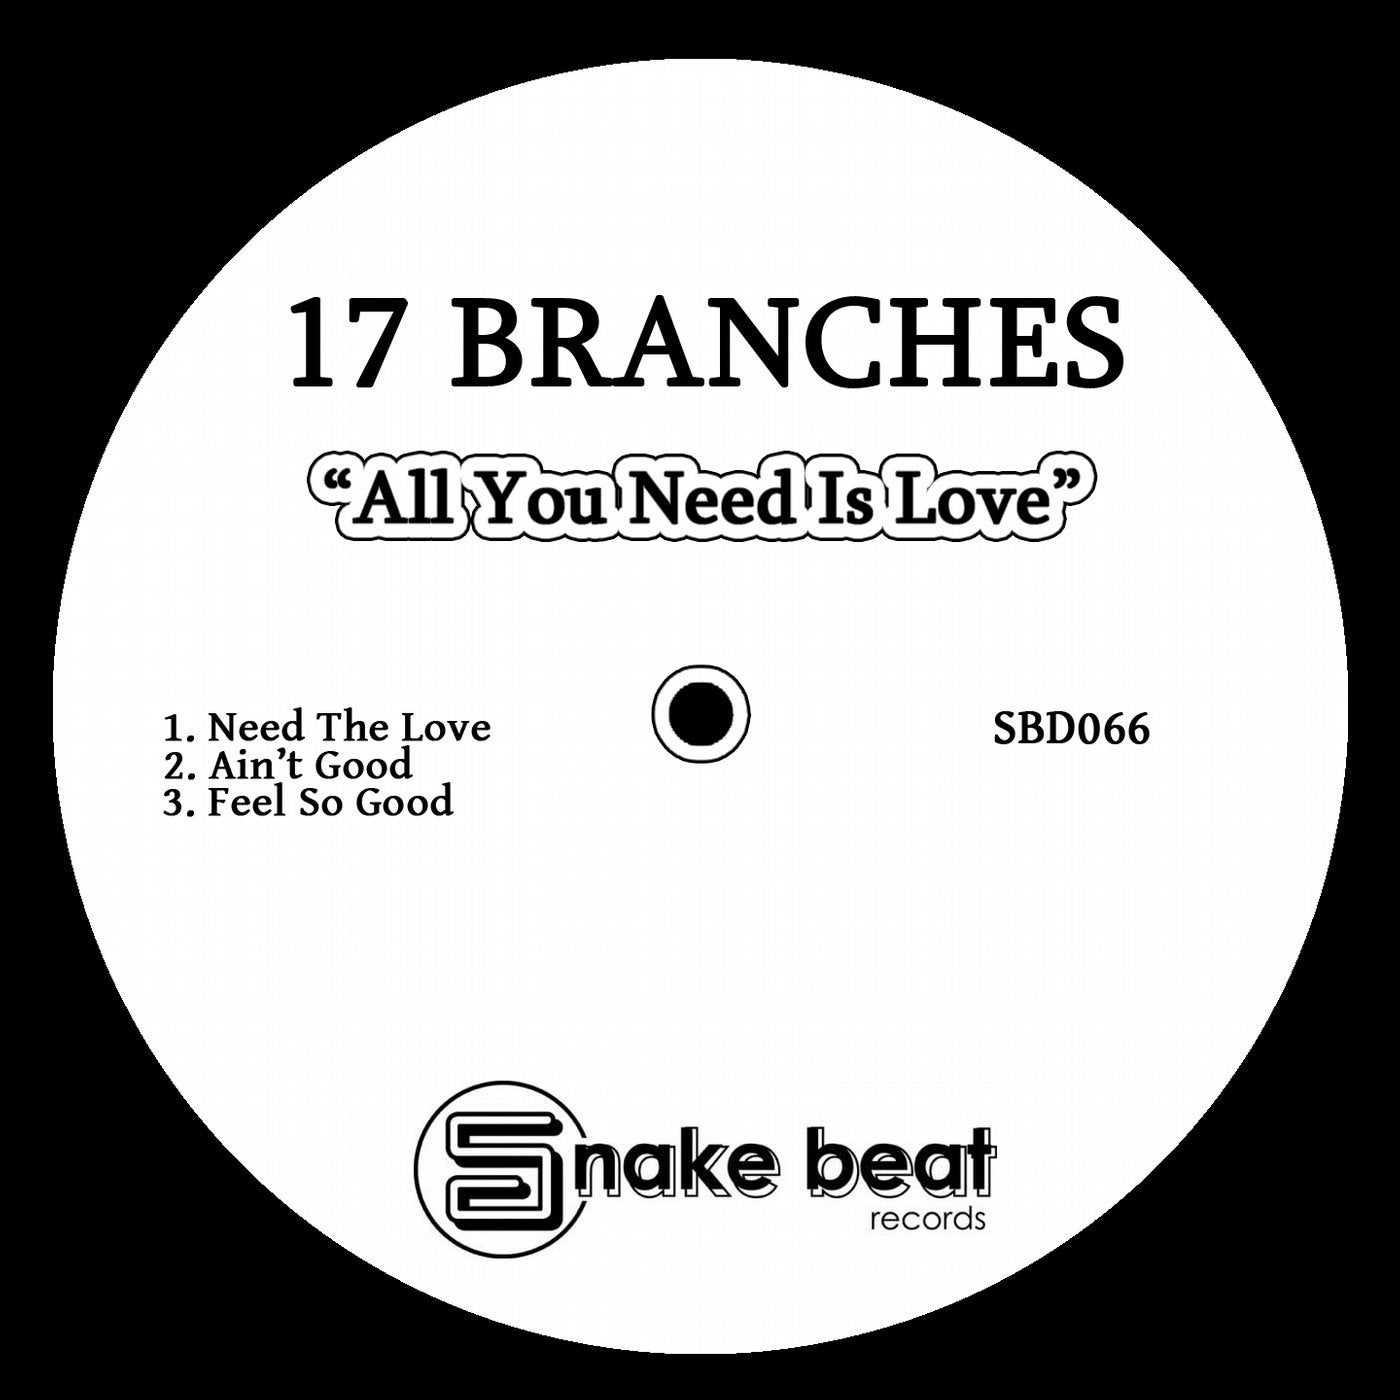 All You Need Is Love EP